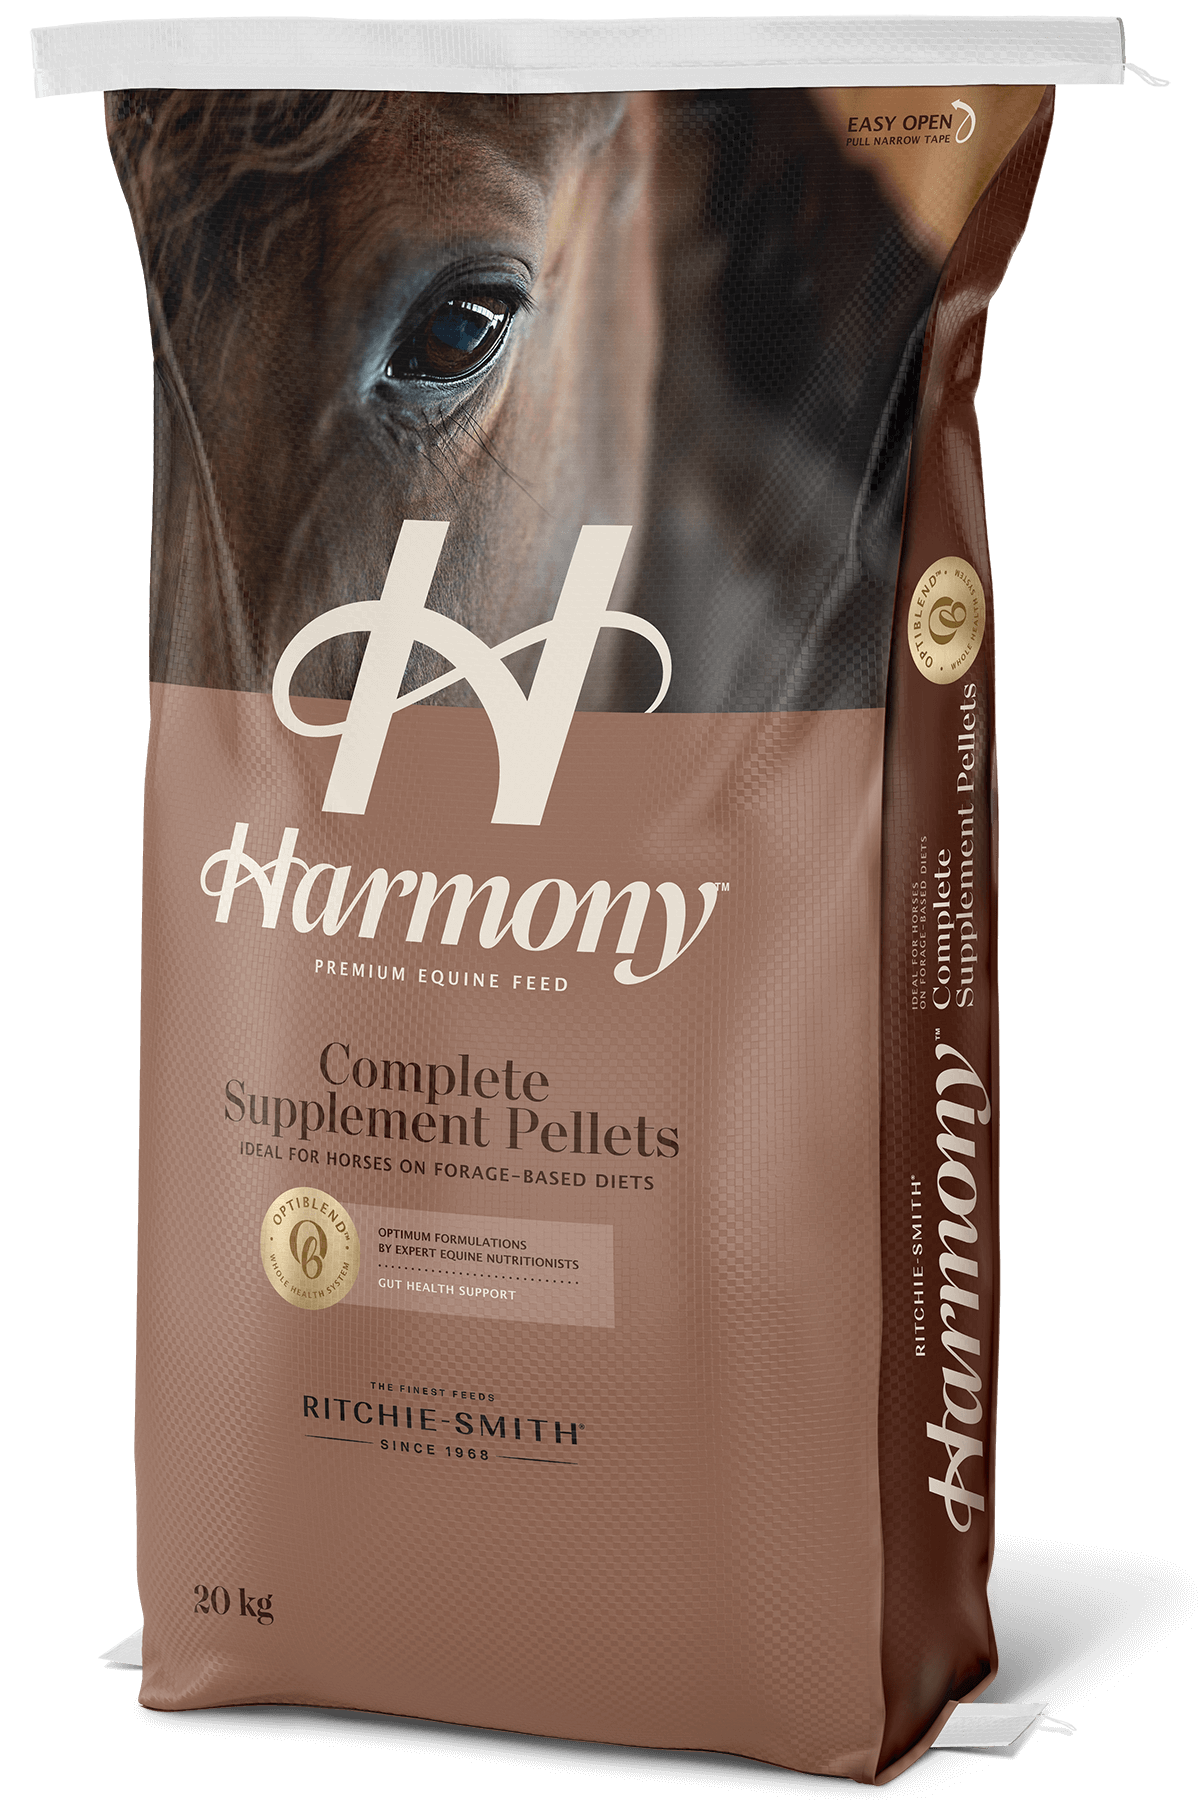 Harmony Complete Supplements Pellets W100120B